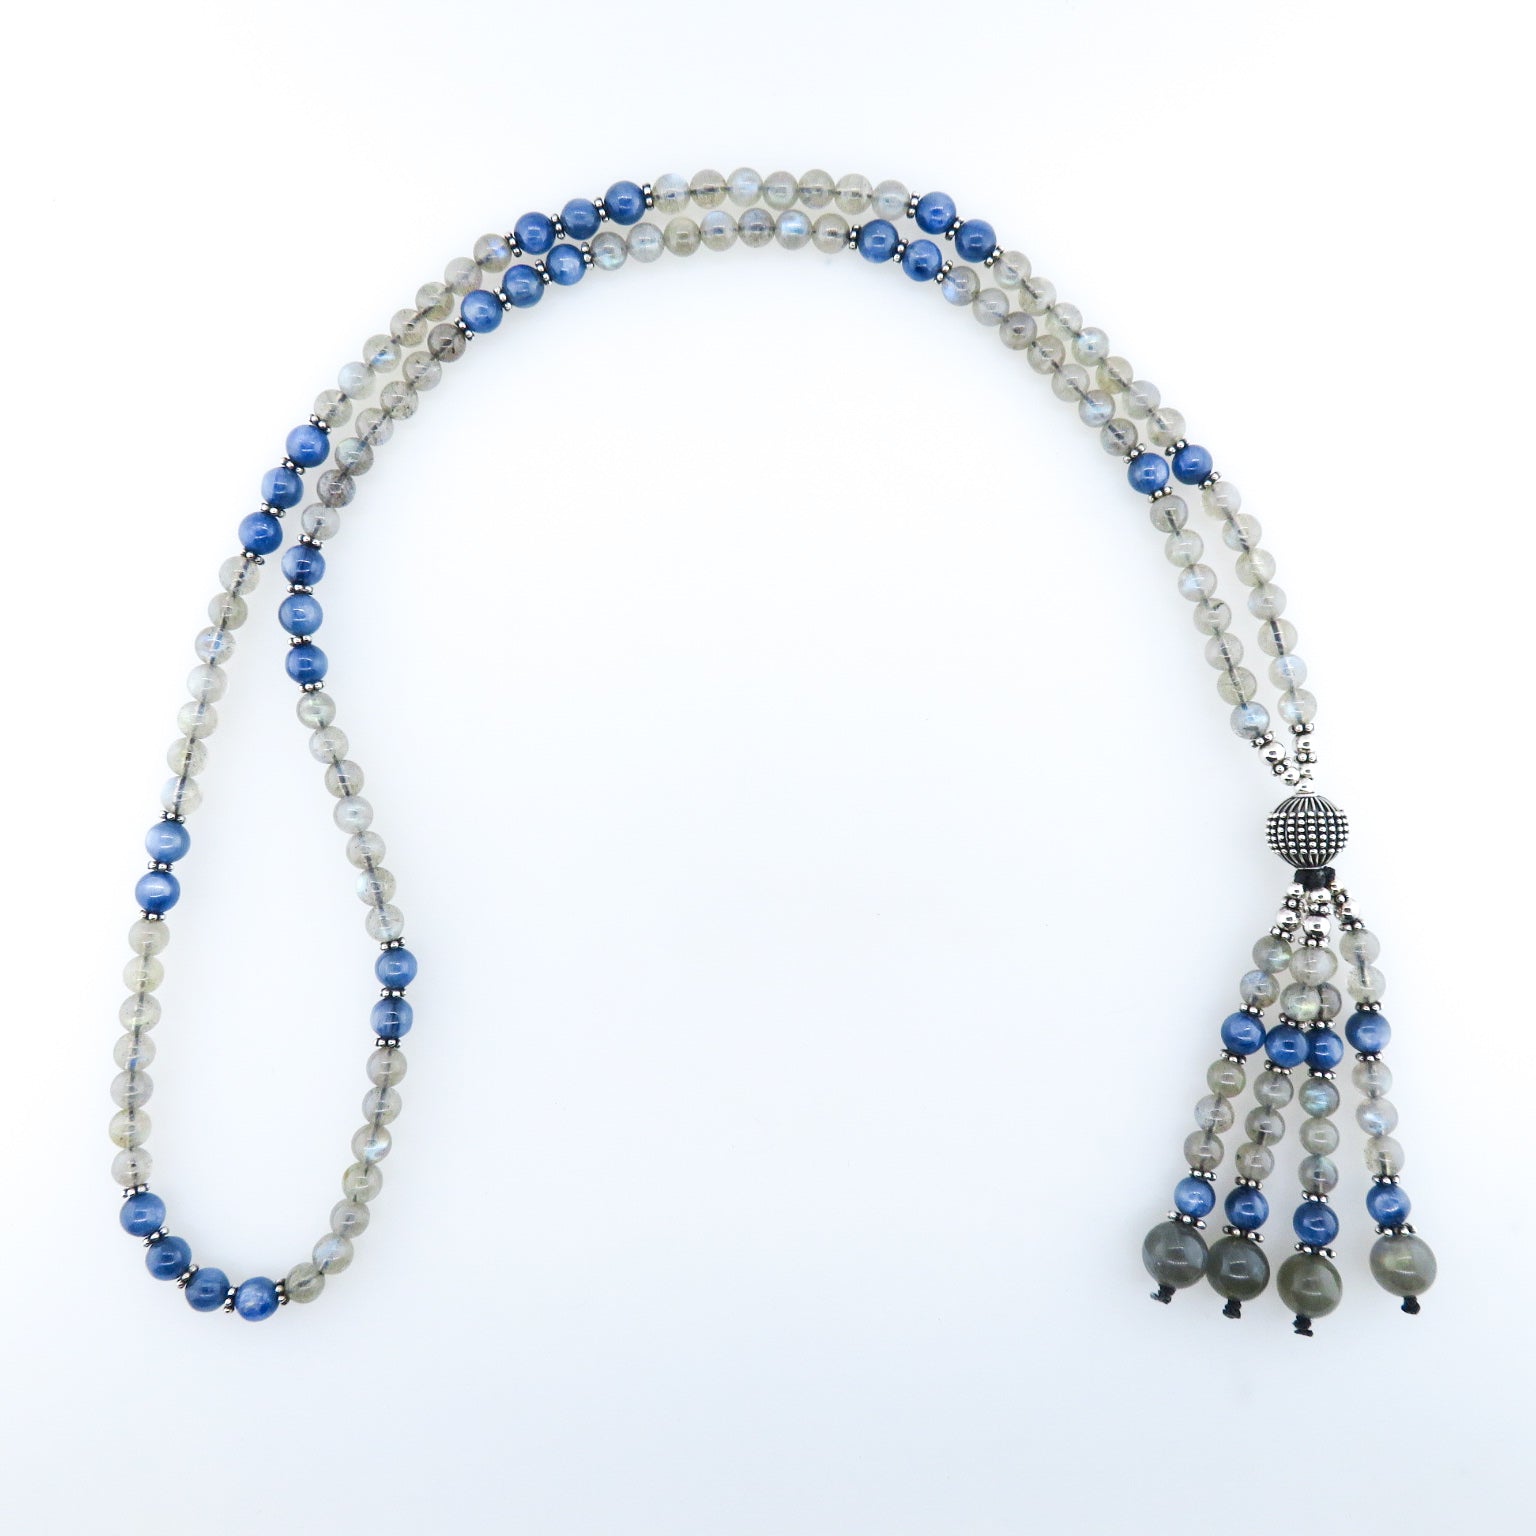 Labradorite Necklace with Kyanite and Silver Beads